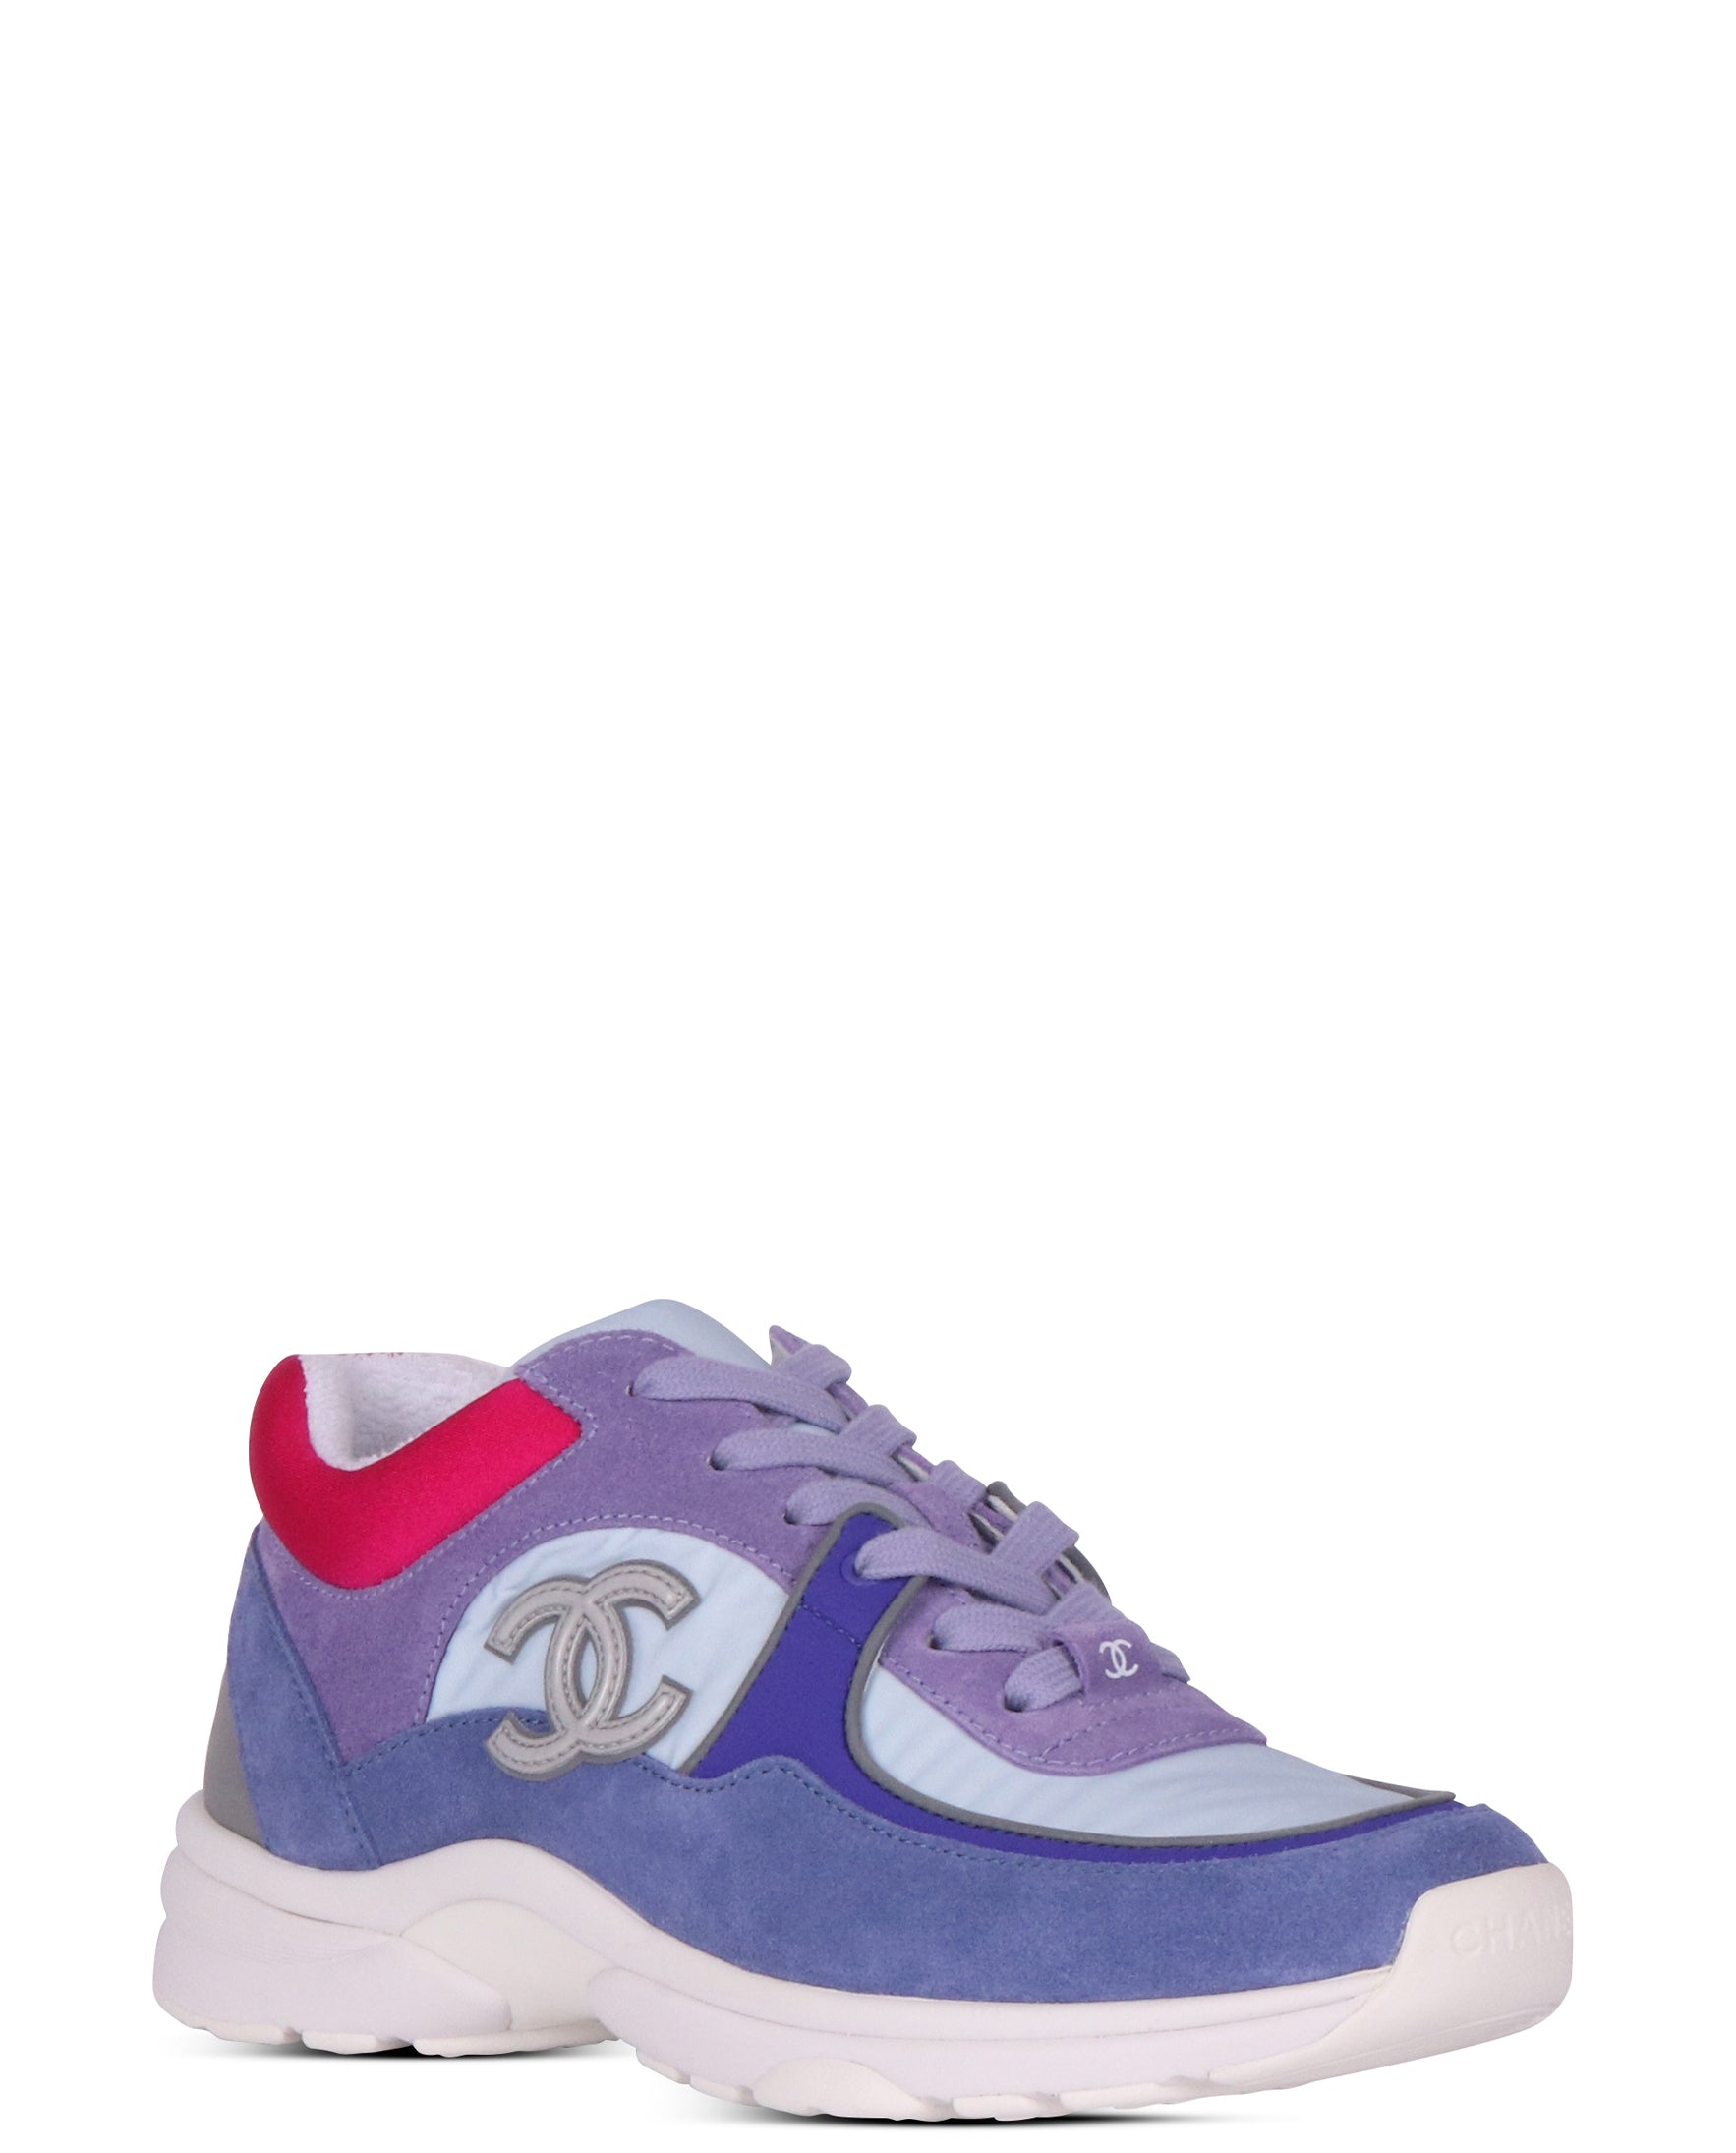 Chanel CC Logo Ivory Blue And Purple Sneakers - SAVIC